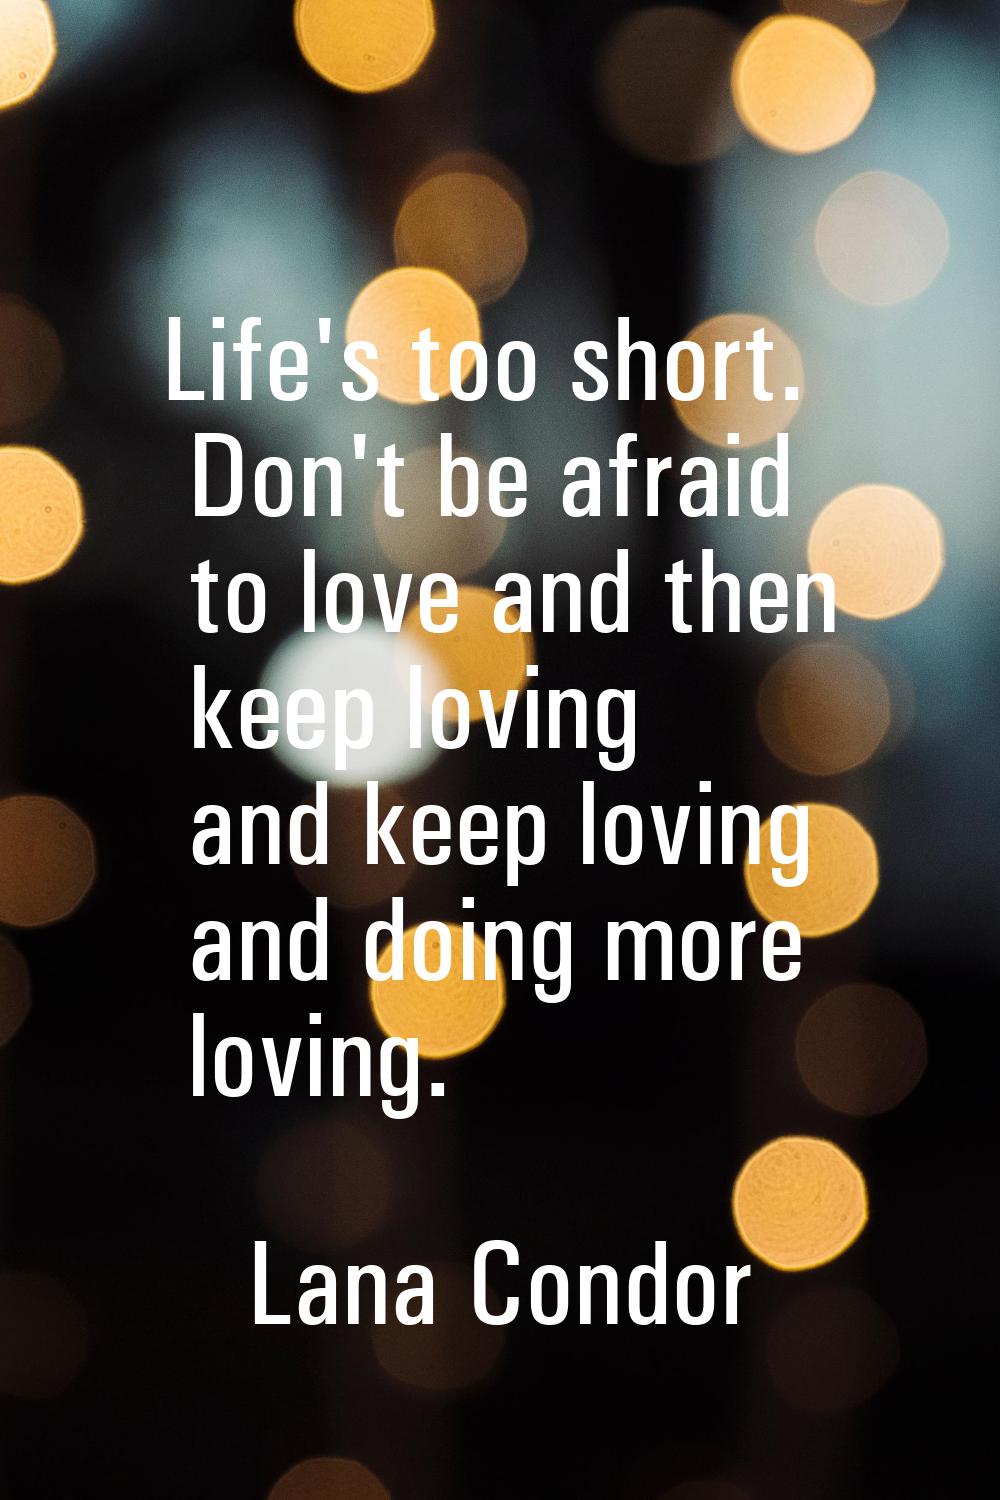 Life's too short. Don't be afraid to love and then keep loving and keep loving and doing more lovin